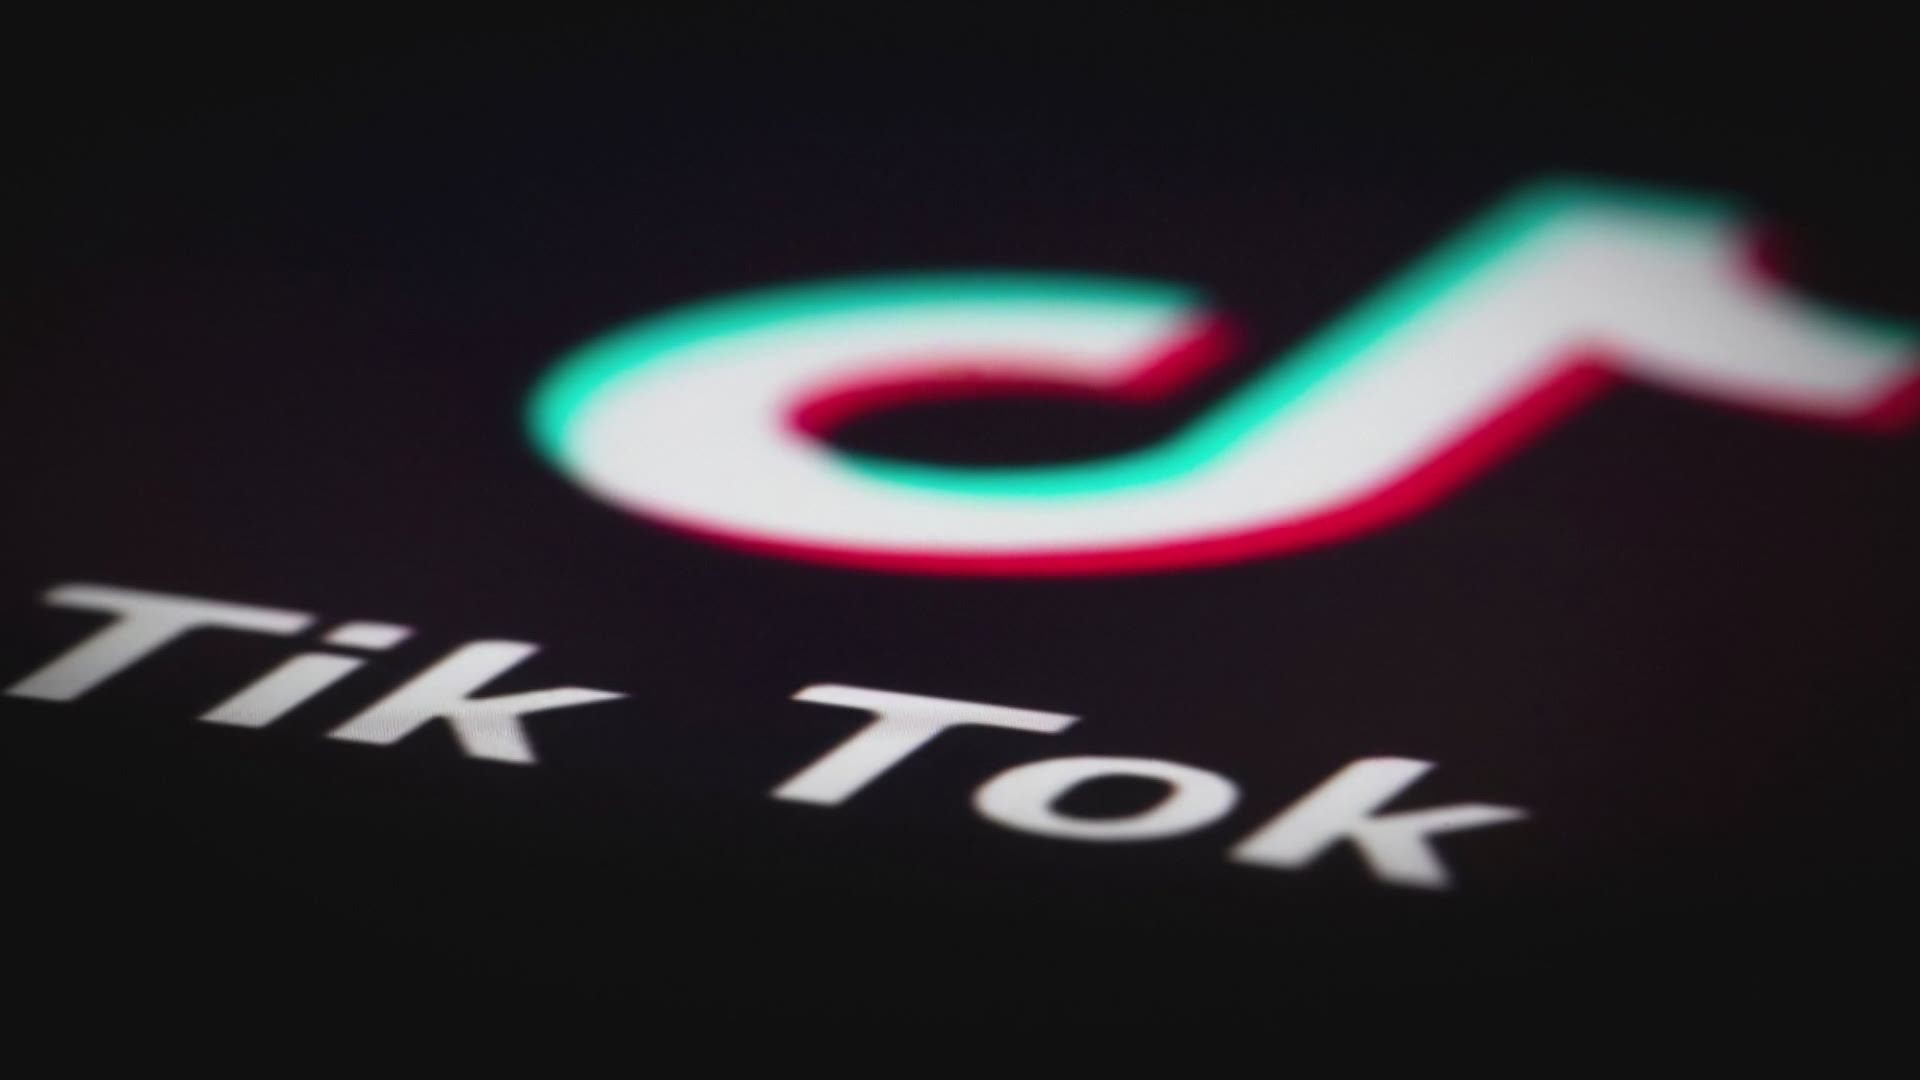 The popular video-sharing app "Tik Tok" will no longer be available to download in the United States.